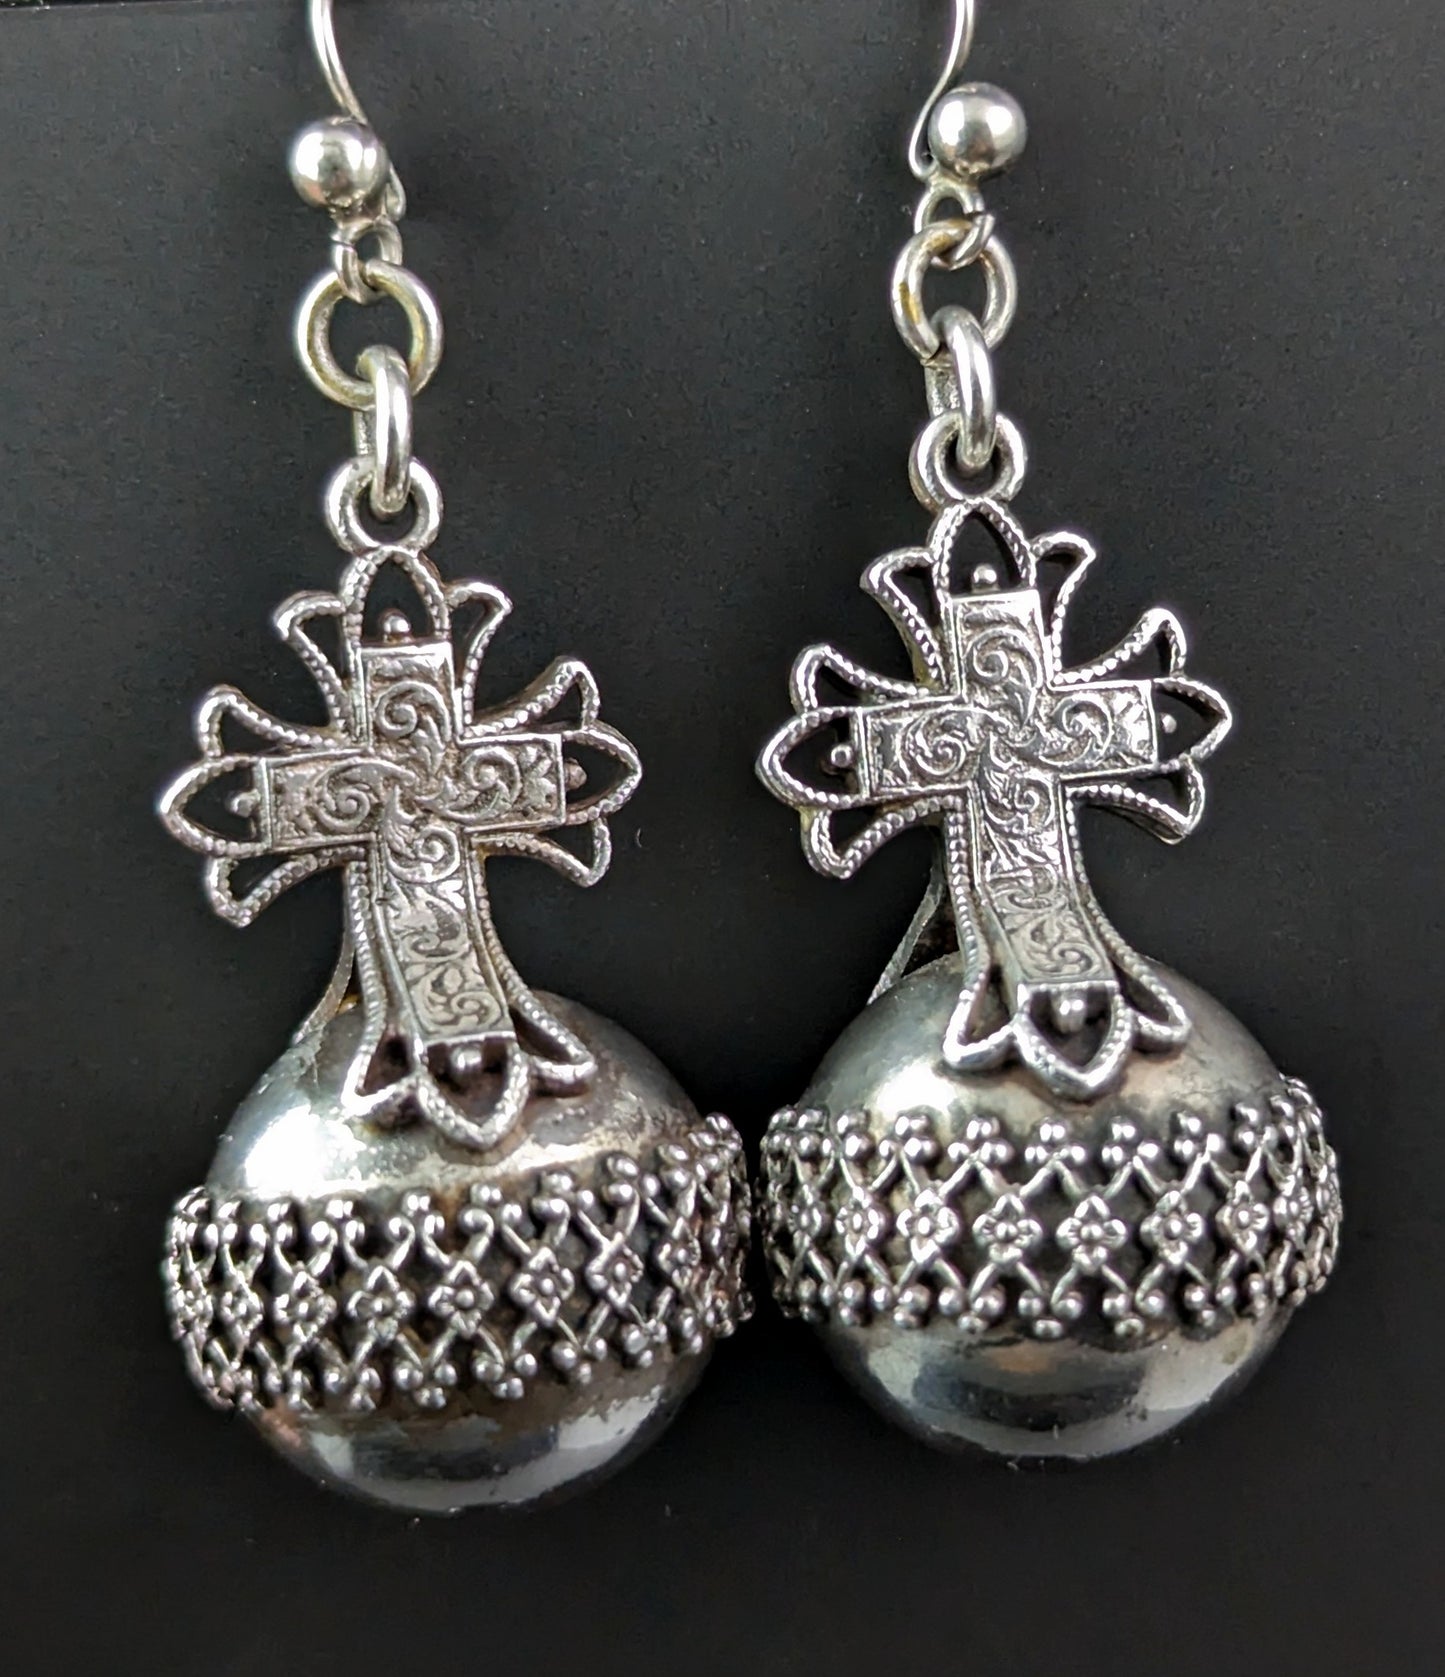 Antique Victorian silver orb and cross earrings, Globus Cruciger